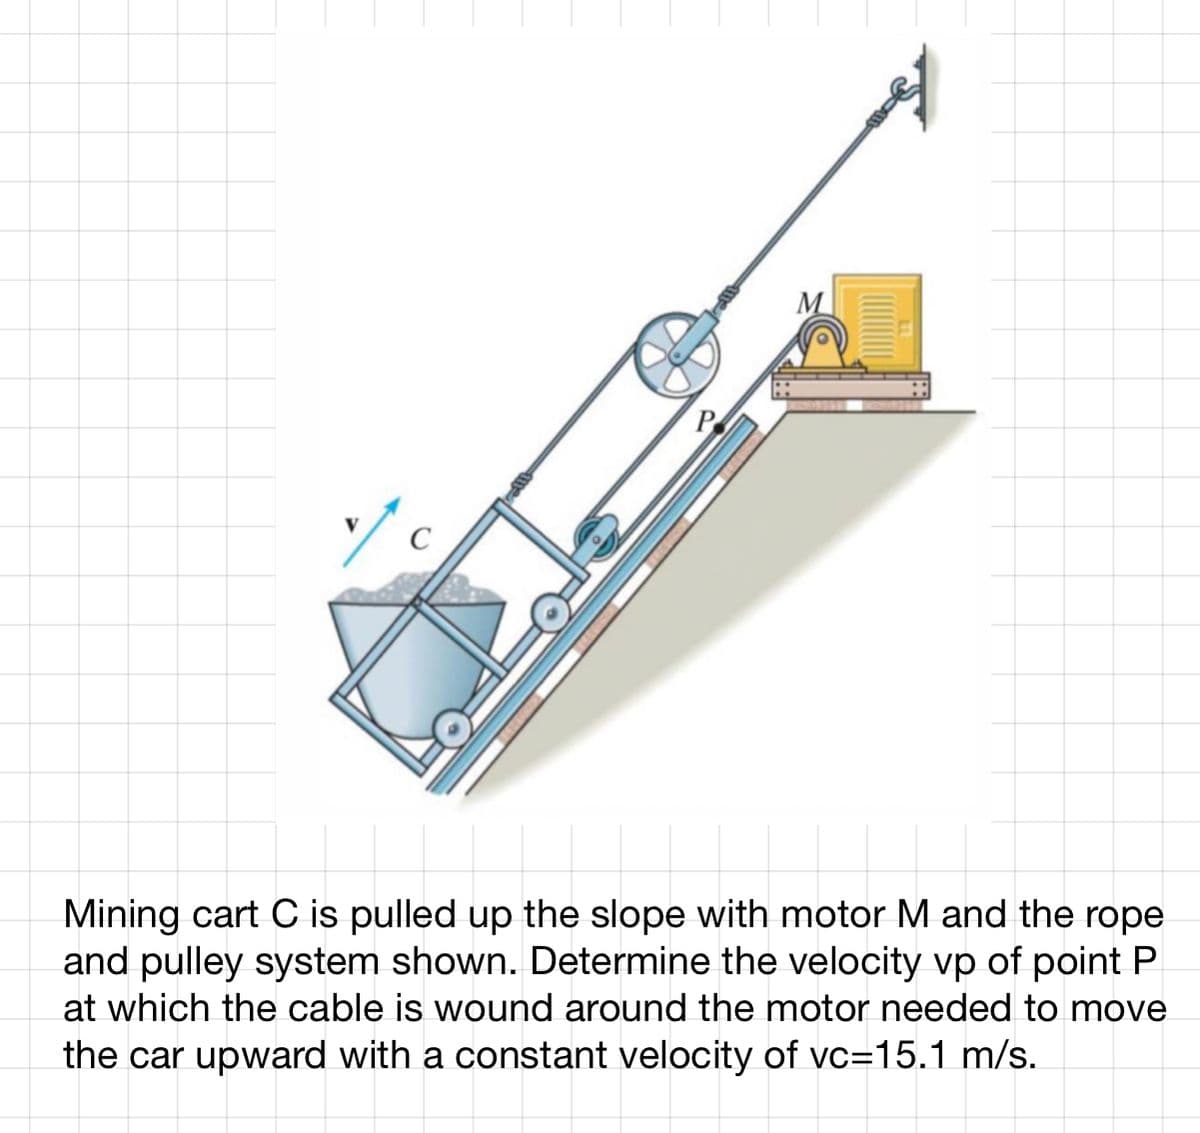 v/c
P
Mining cart C is pulled up the slope with motor M and the rope
and pulley system shown. Determine the velocity vp of point P
at which the cable is wound around the motor needed to move
the car upward with a constant velocity of vc=15.1 m/s.